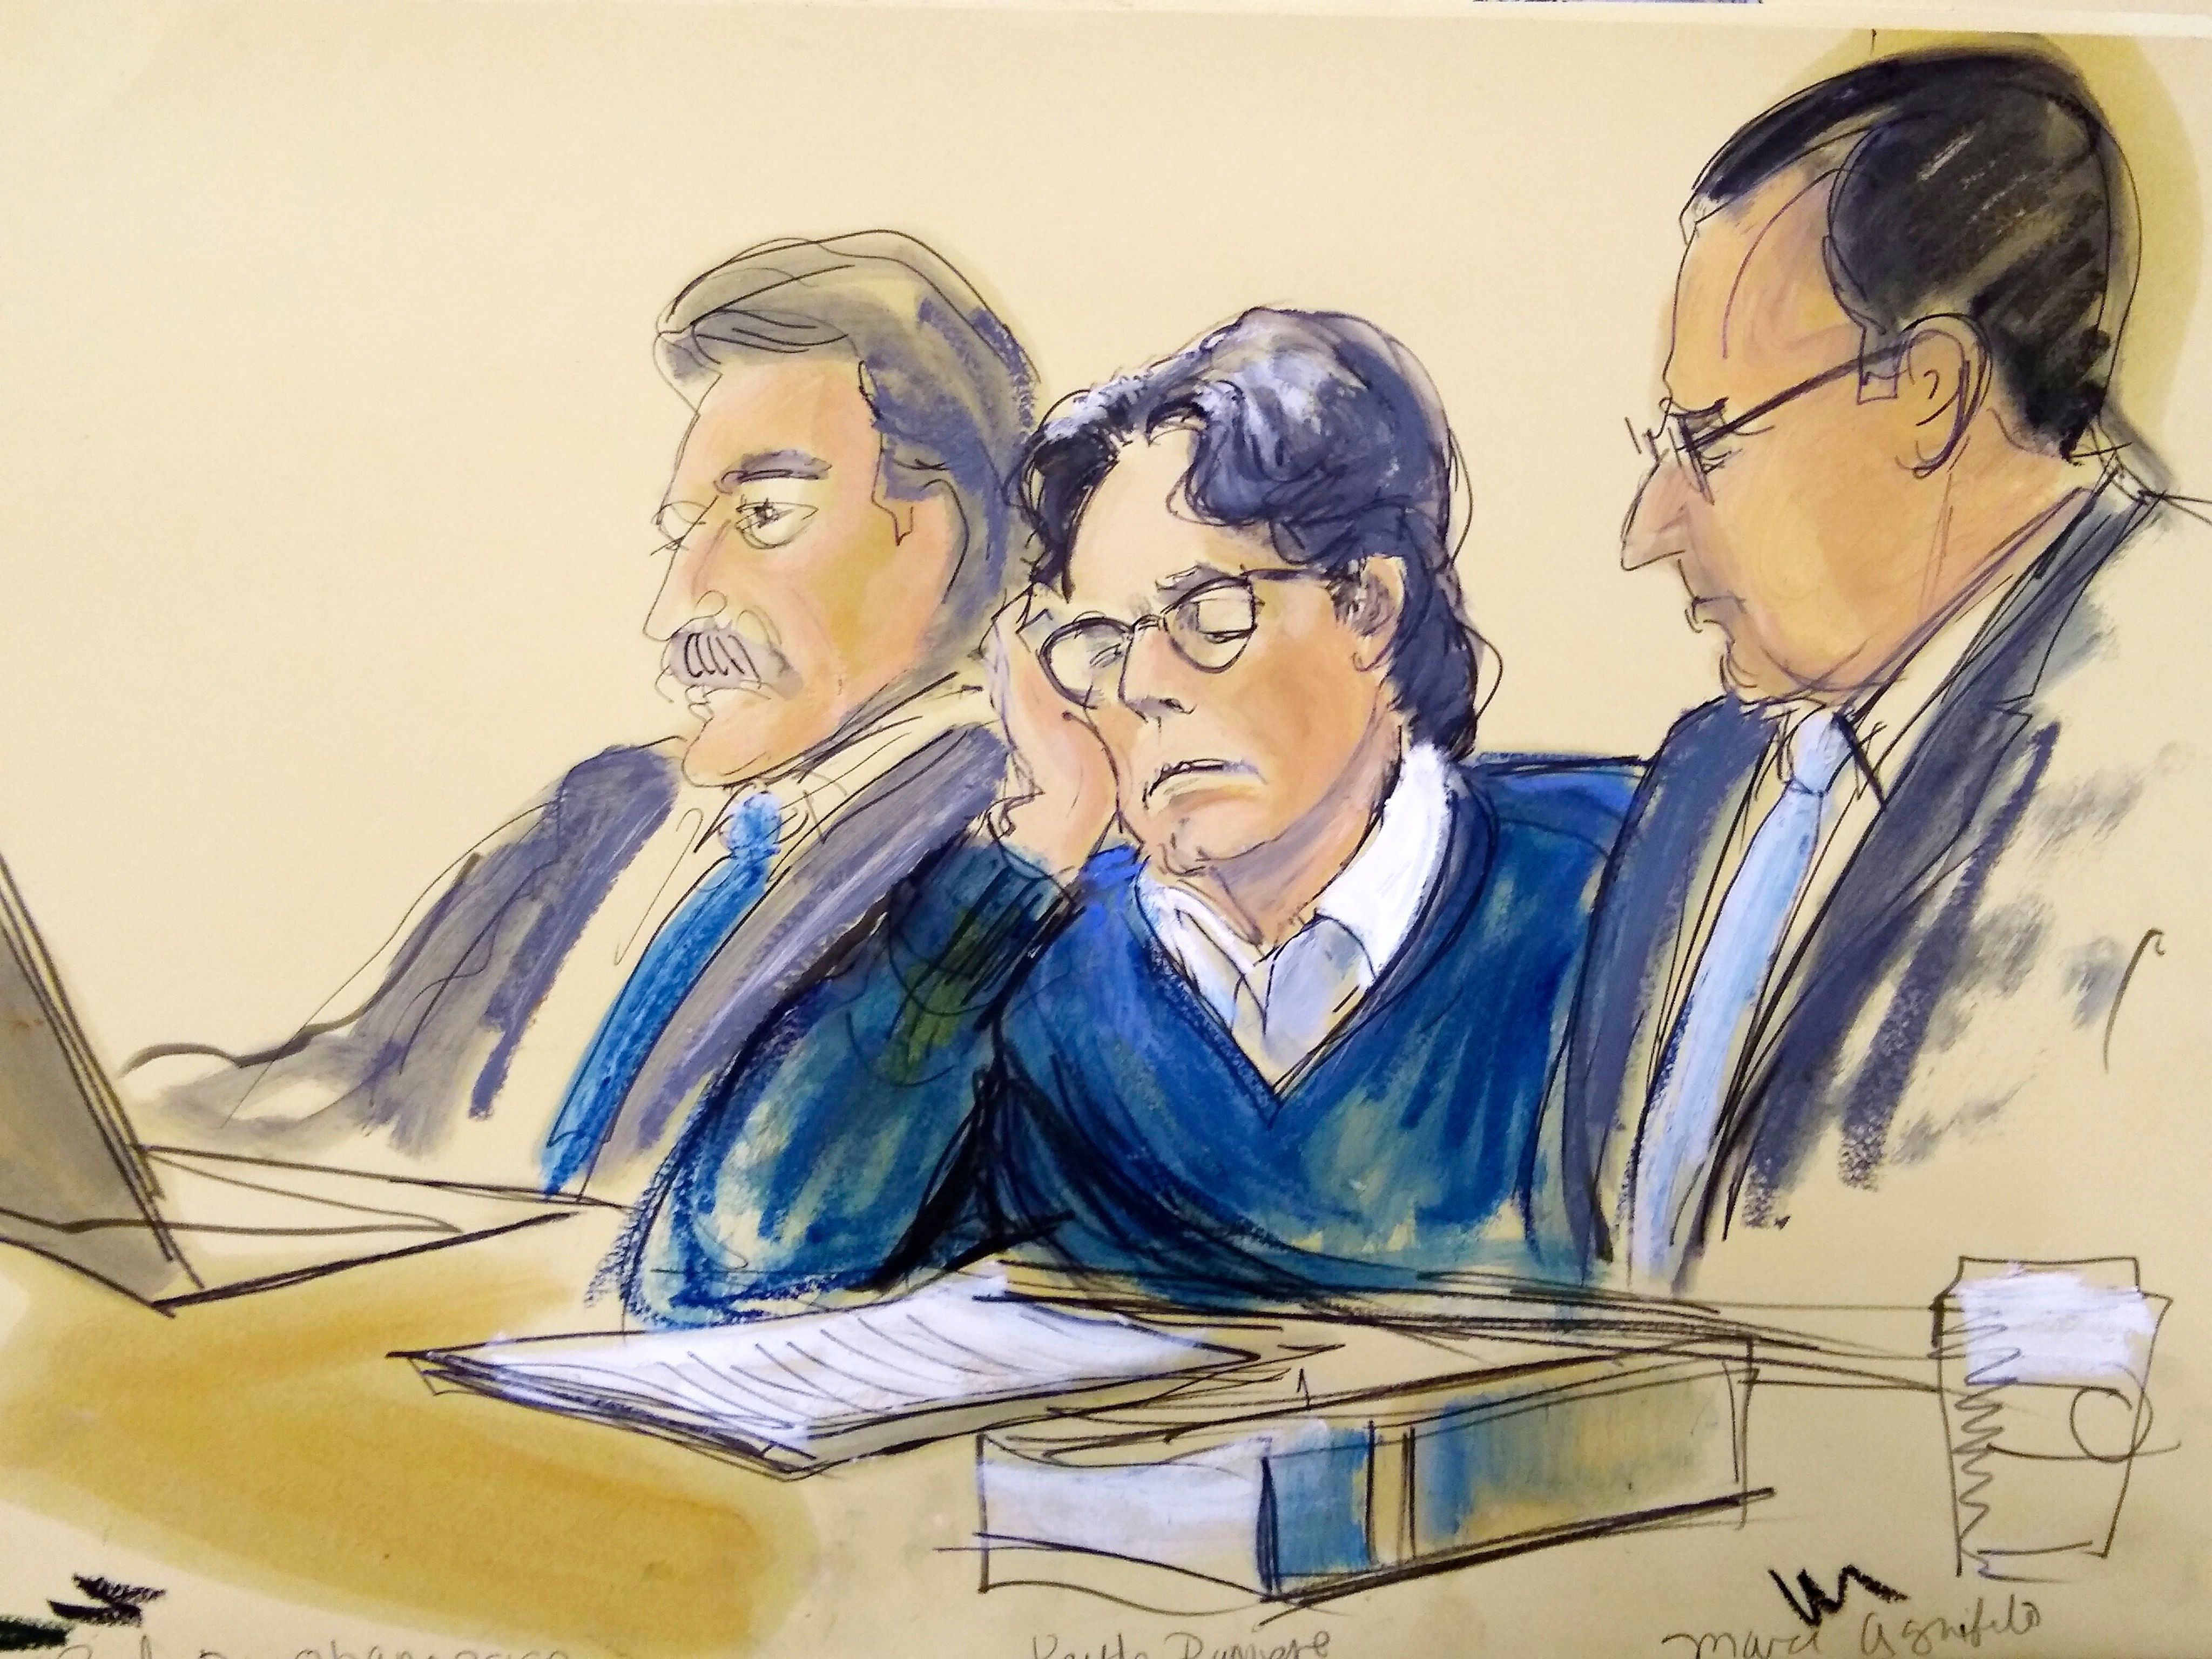 Every Wild Allegation From the NXIVM 'Sex Cult' Trial